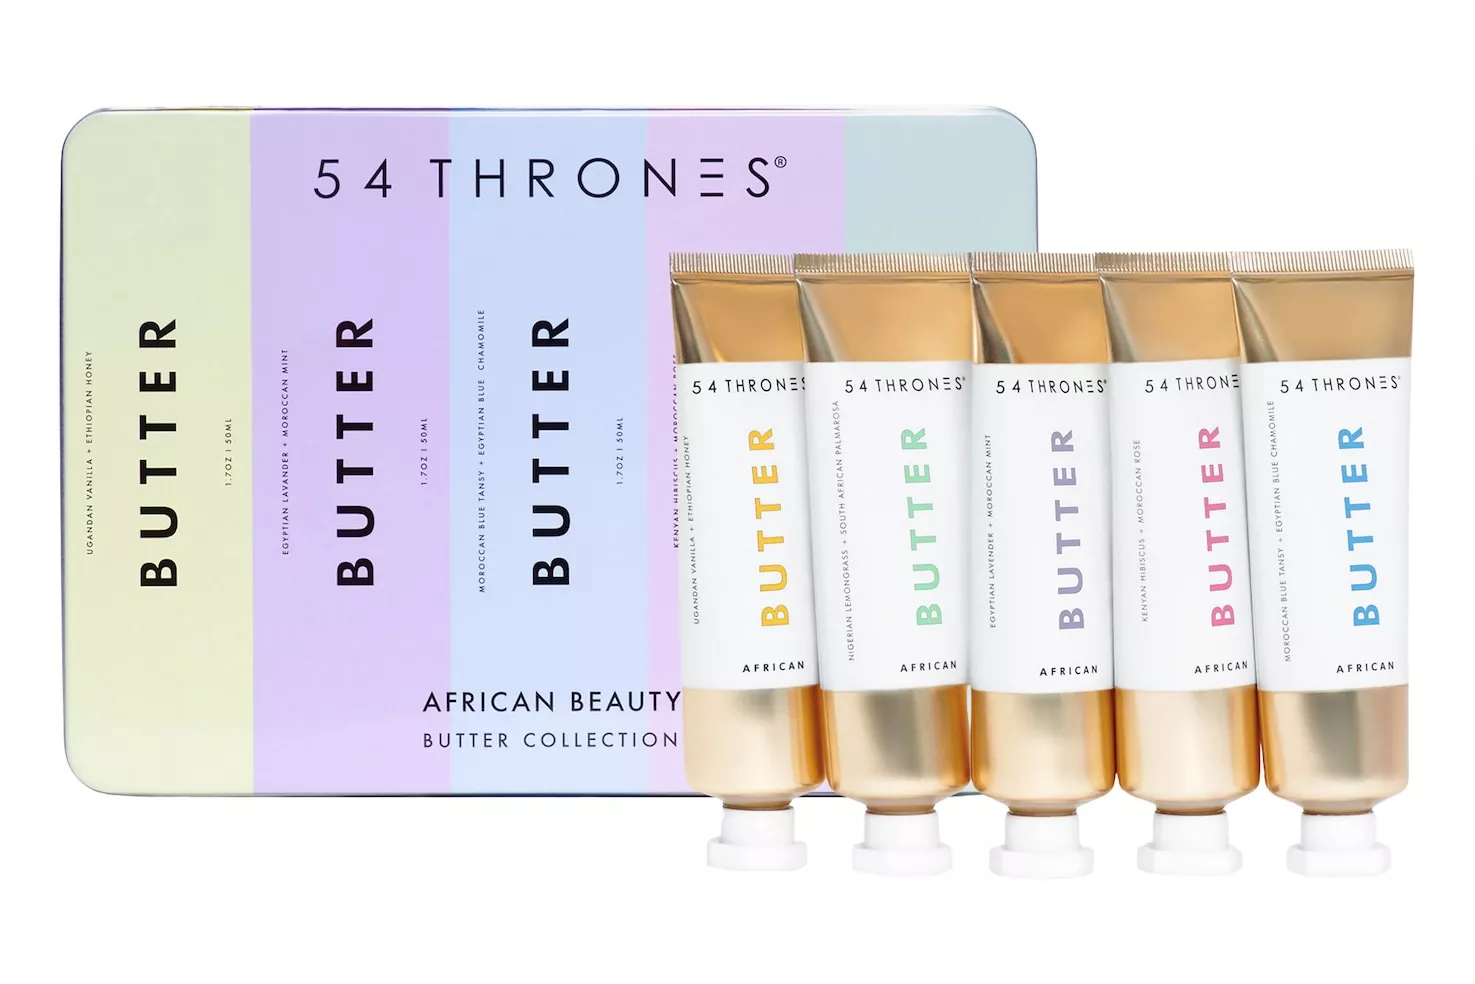 54 Thrones African Beauty Butter Collection Deluxe Tin